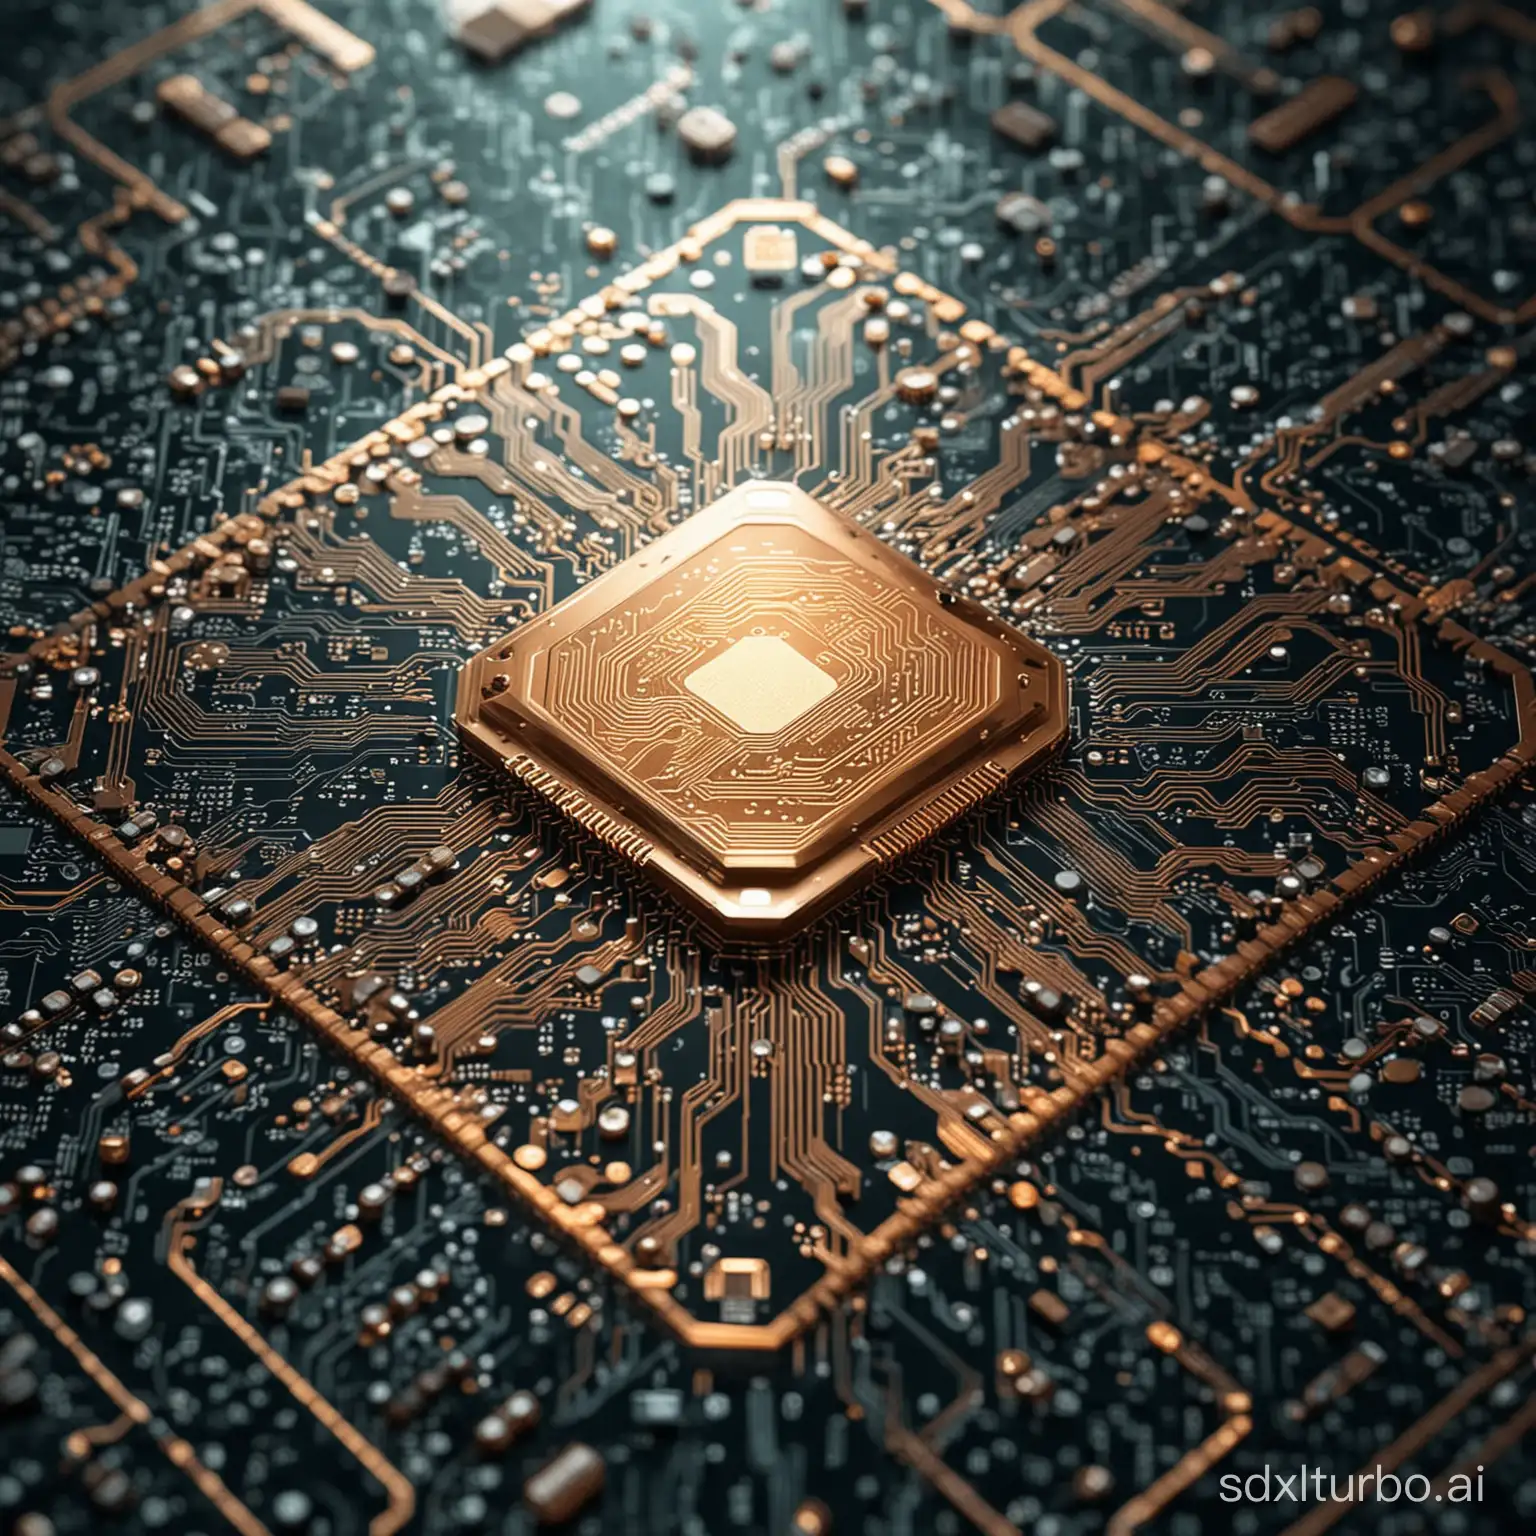 Create an AI-inspired image featuring sleek, metallic surfaces with intricate circuit patterns intertwining throughout. The overall ambiance should convey a sense of innovation, intelligence, and the cutting edge of technology. A IC chip is floating with a flashing light in the center and below the chip, accompanied by the flow of current outward. While this description might be a metaphorical representation of the working state of an electronic device, in reality, chips or integrated circuits do not emit light.